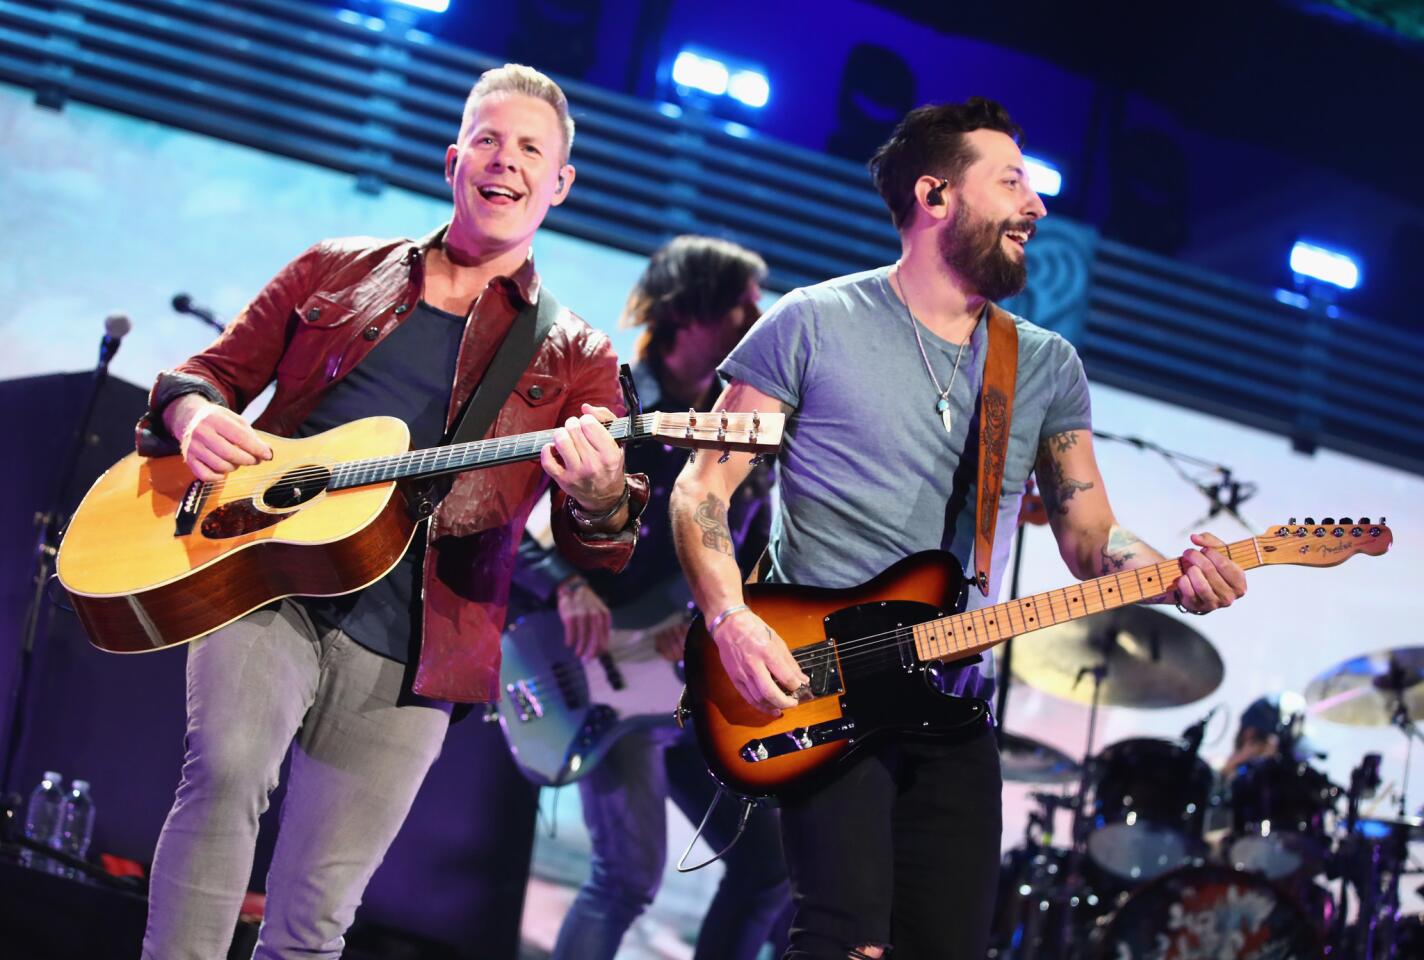 WPOC Sunday in the Country, featuring Old Dominion (pictured), Michael Ray, Jordan Davis, Lauren Alaina, Dylan Scott, Jimmie Allen, Brandon Lay and Filmore, is set for Sept. 29 at Merriweather Post Pavilion in Columbia.